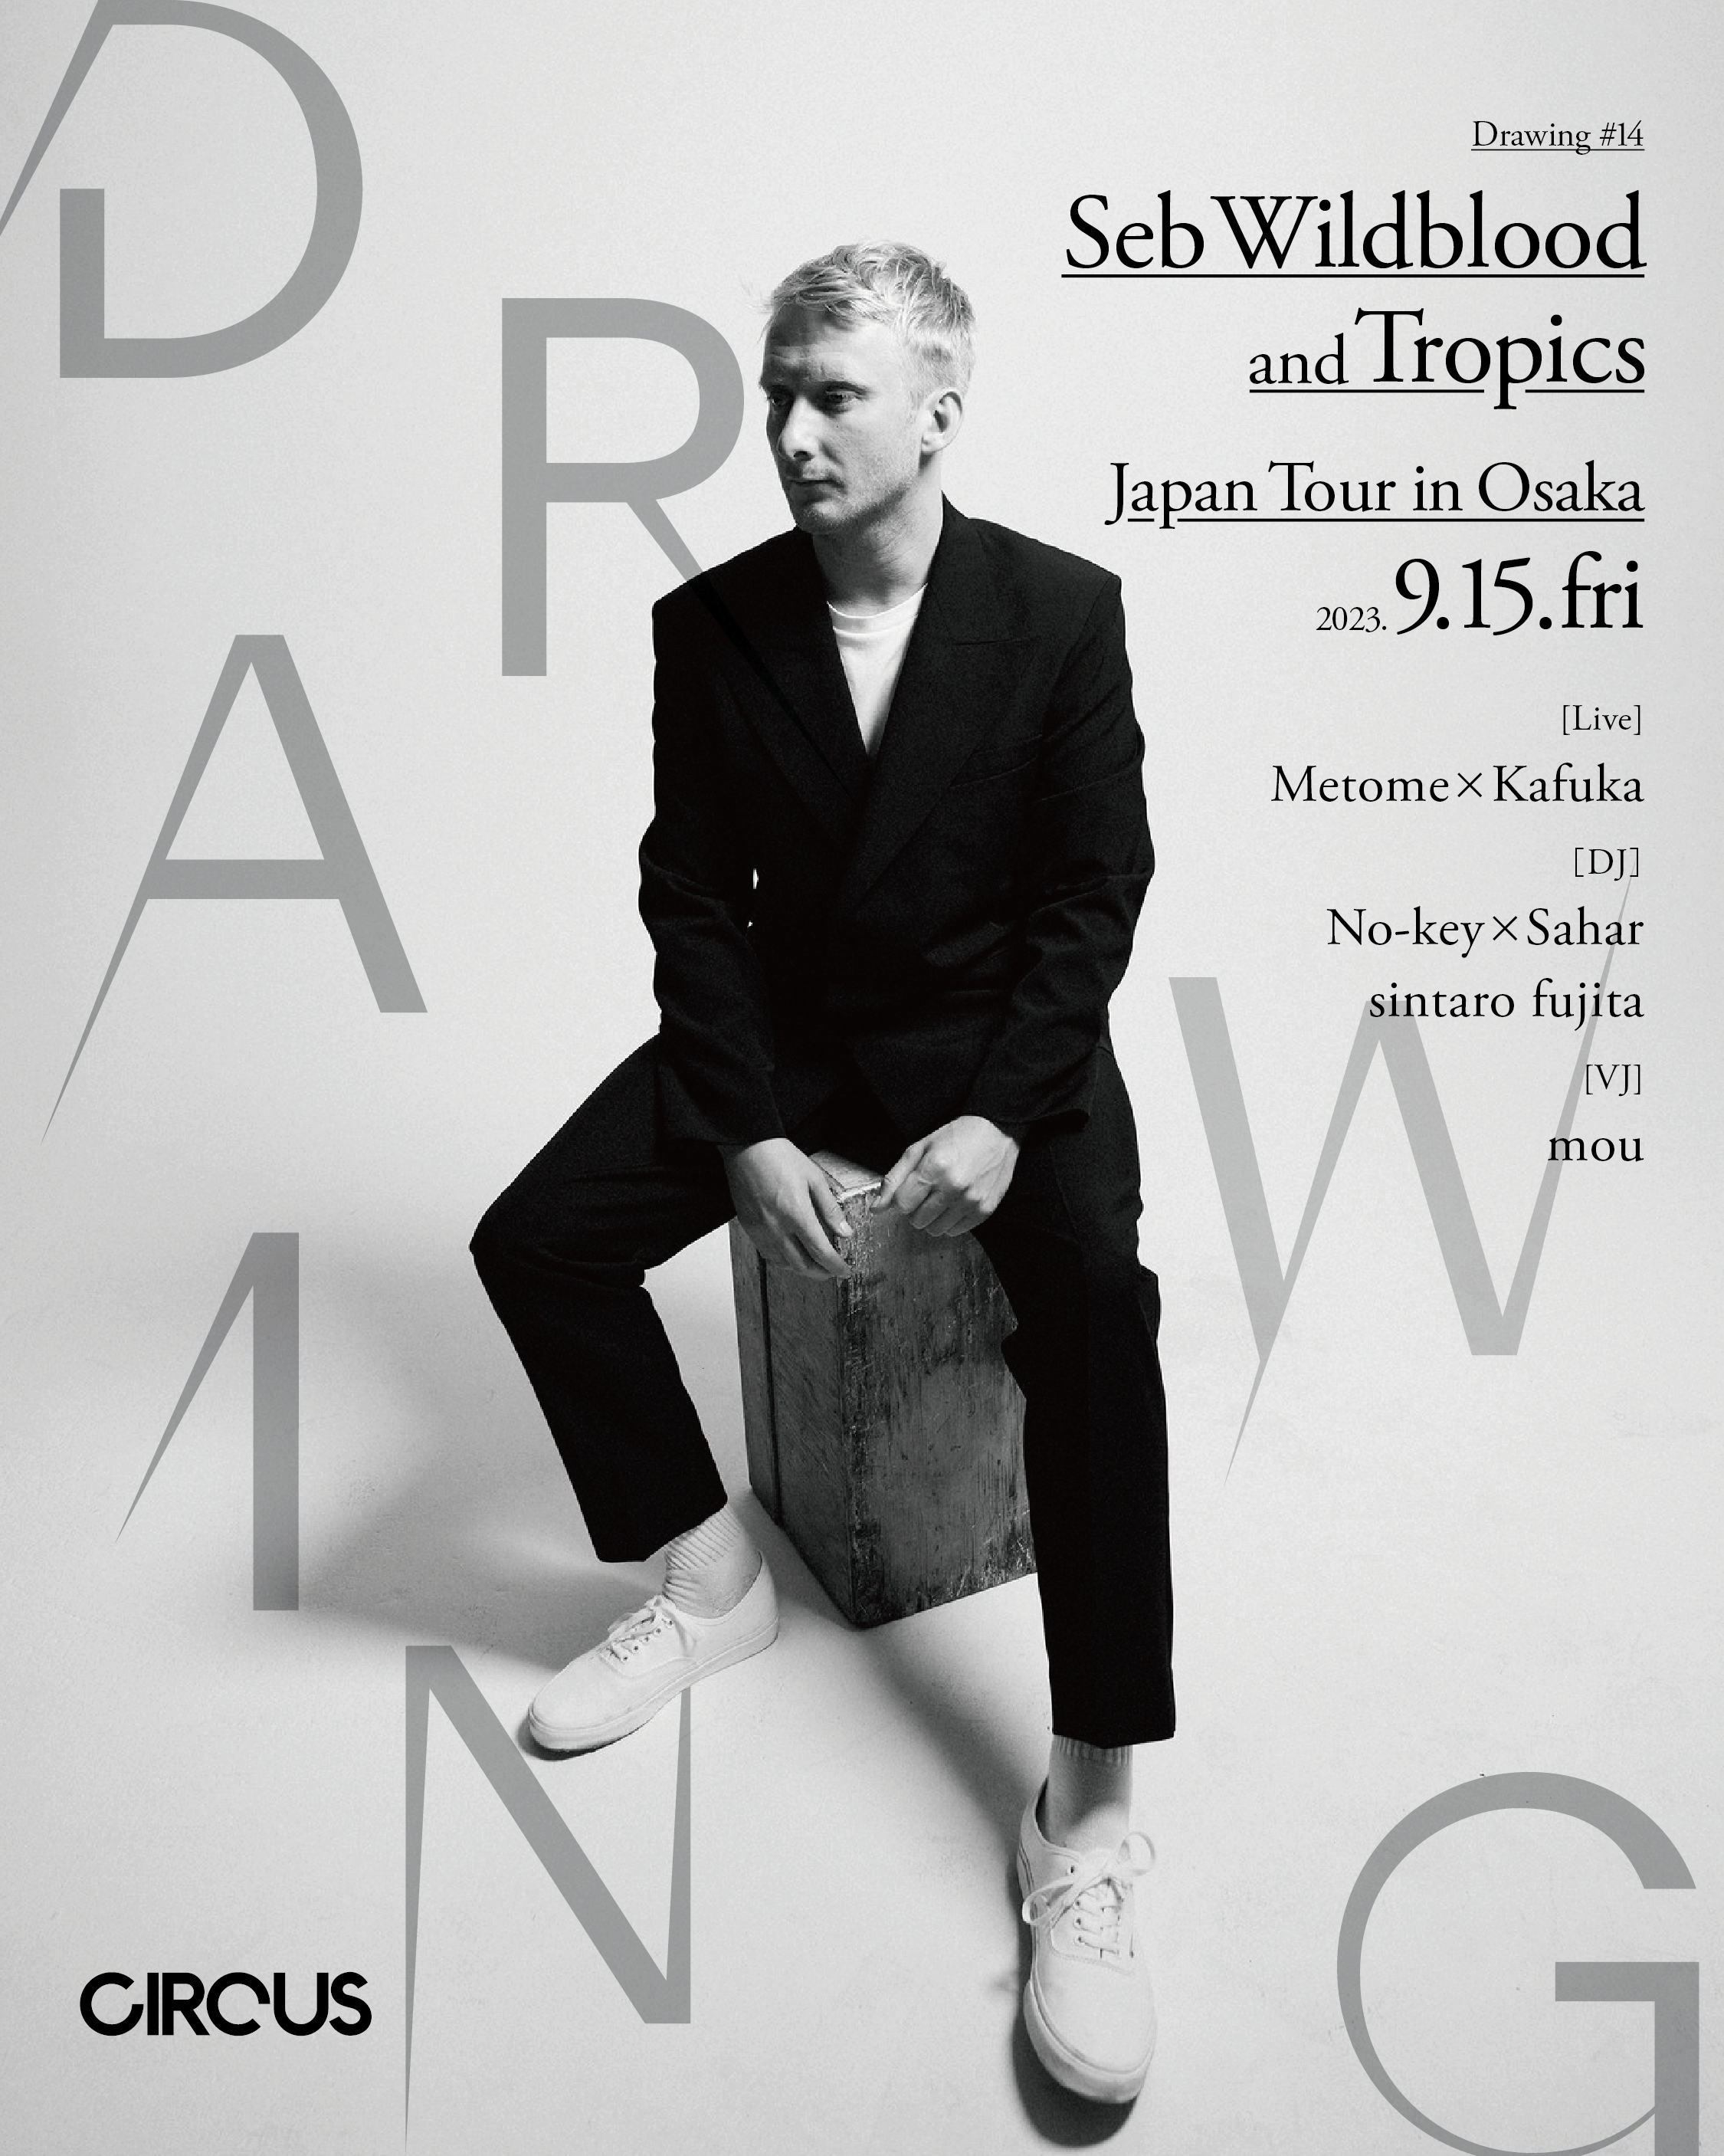 Seb Wildblood and Tropics Japan Tour in Osaka Supported by drawing - フライヤー表